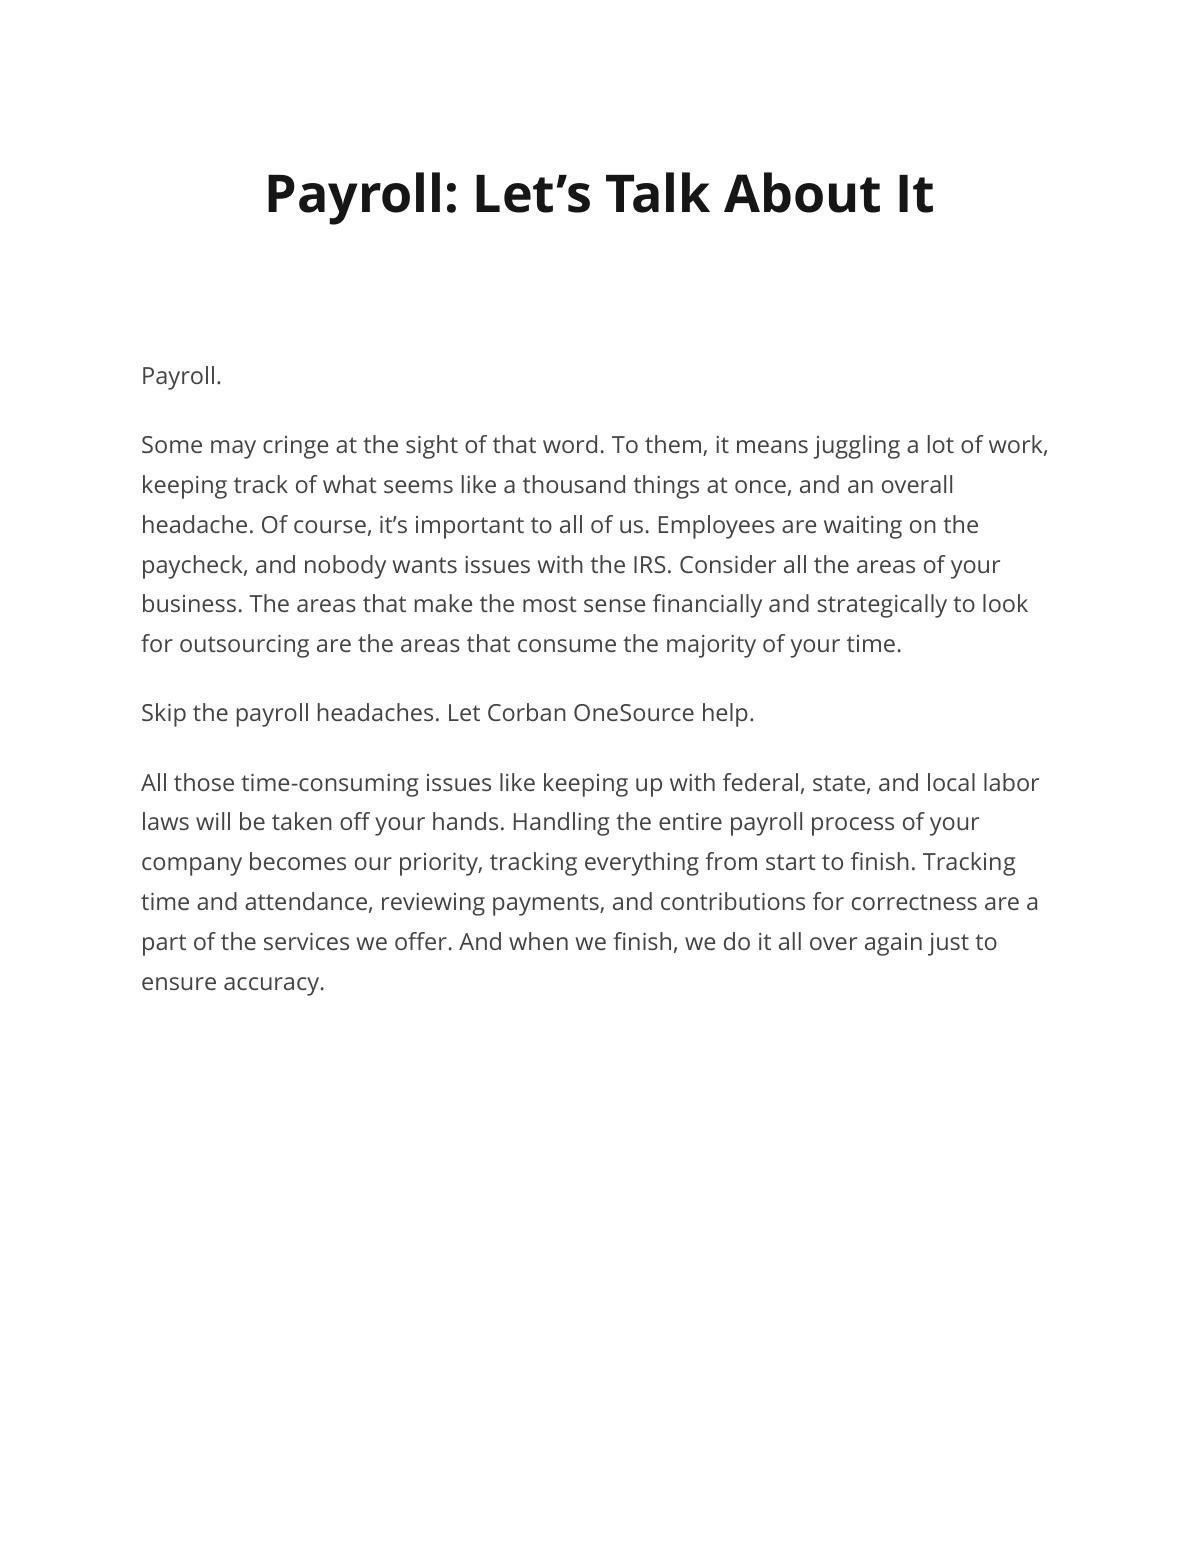 Payroll: Let’s Talk About It